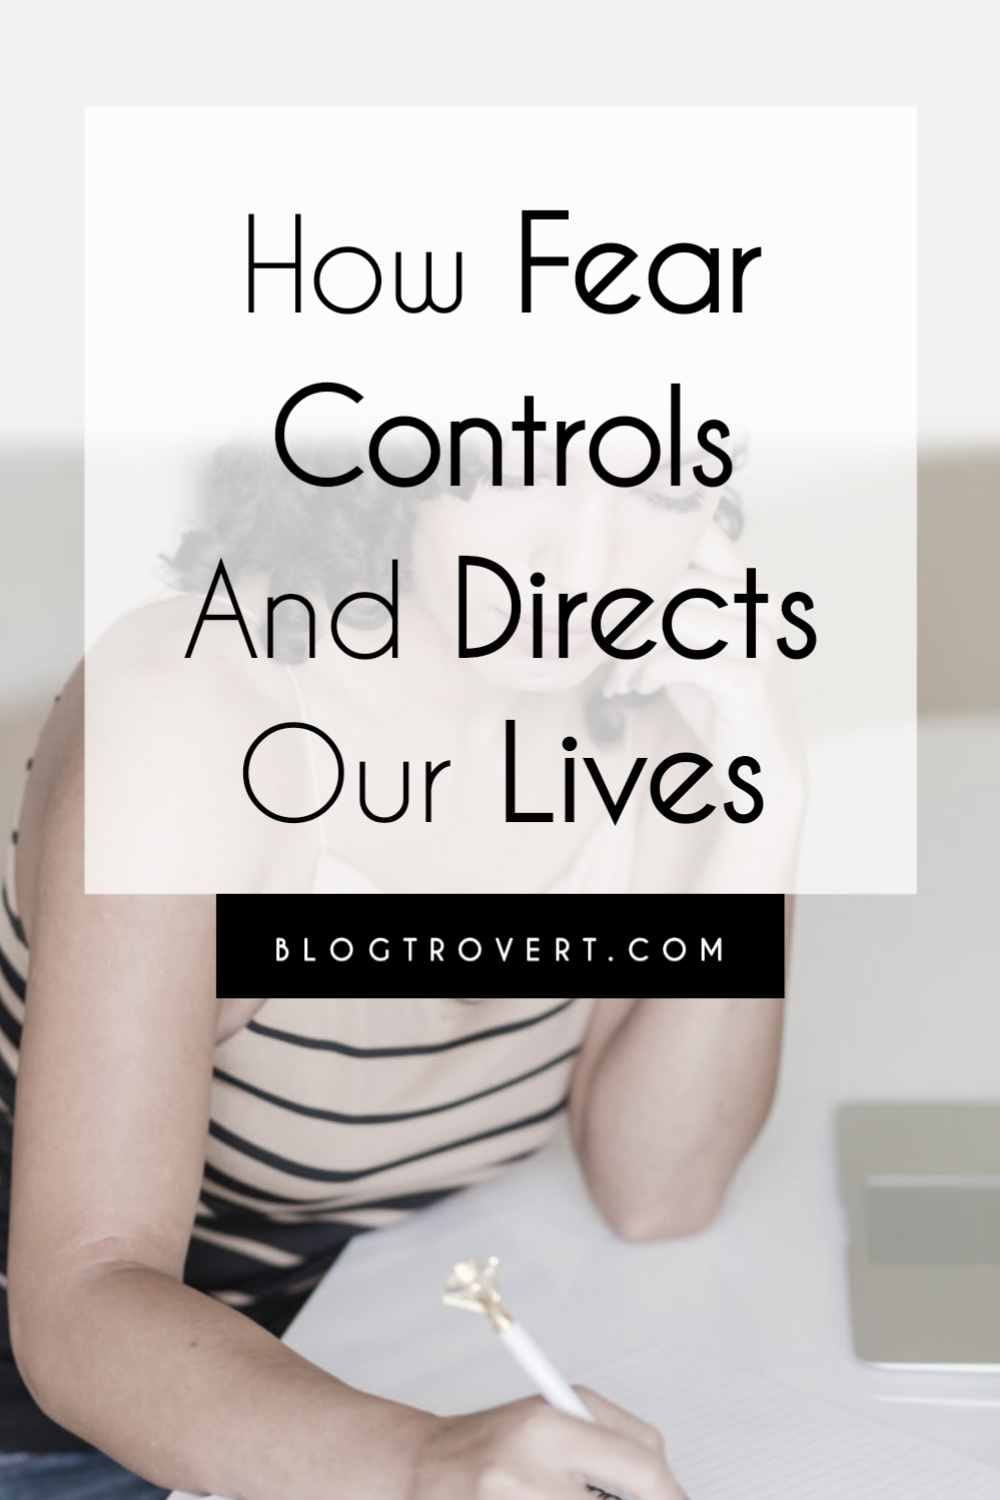 How fear controls us - Why we must take over 6